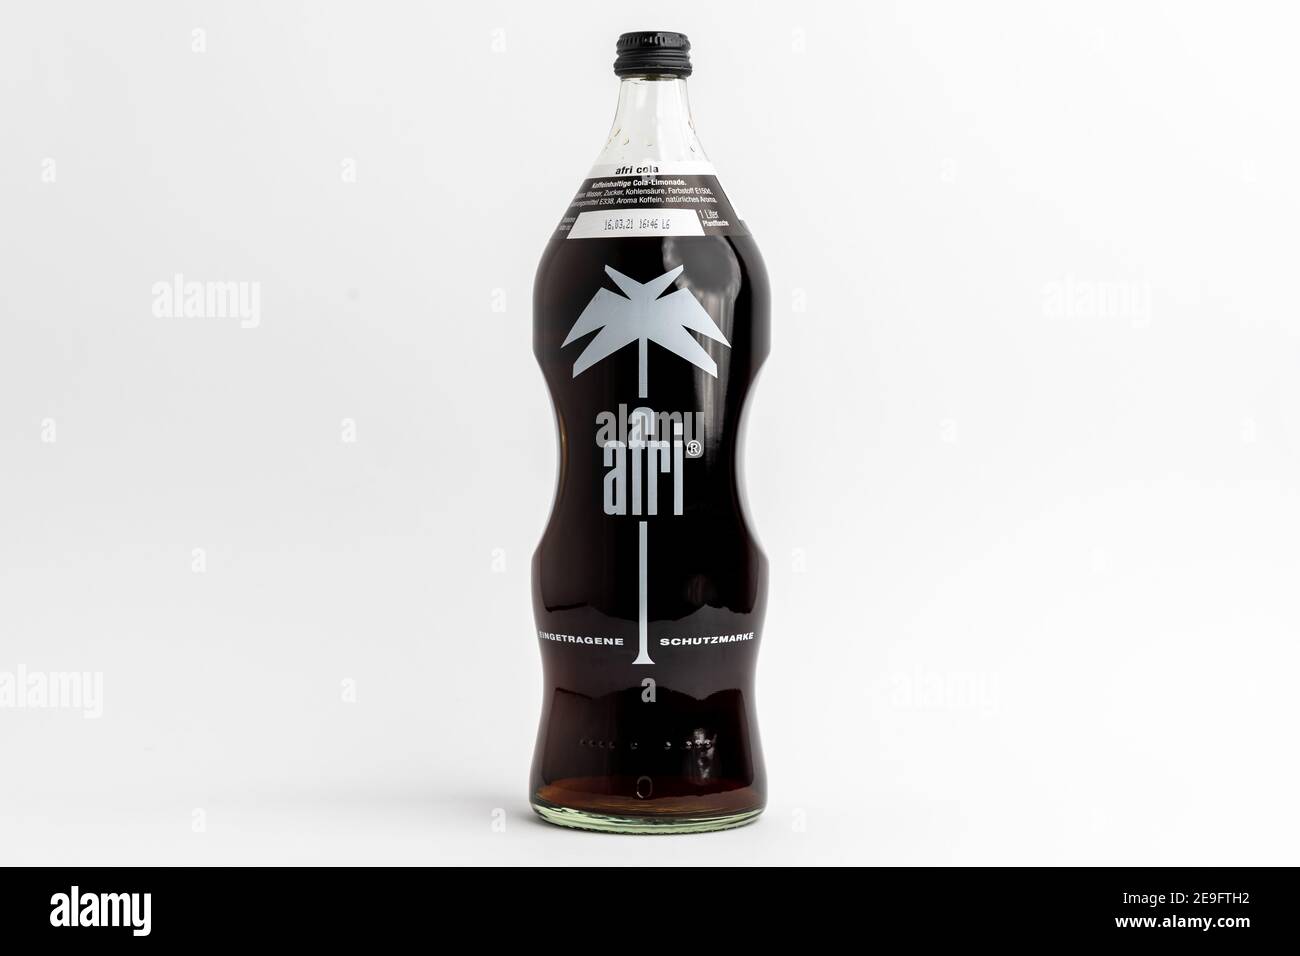 https://c8.alamy.com/comp/2E9FTH2/1-liter-afri-cola-glass-bottle-in-front-of-white-background-refreshing-soft-drink-beverage-made-in-germany-the-iconic-design-in-a-big-size-2E9FTH2.jpg